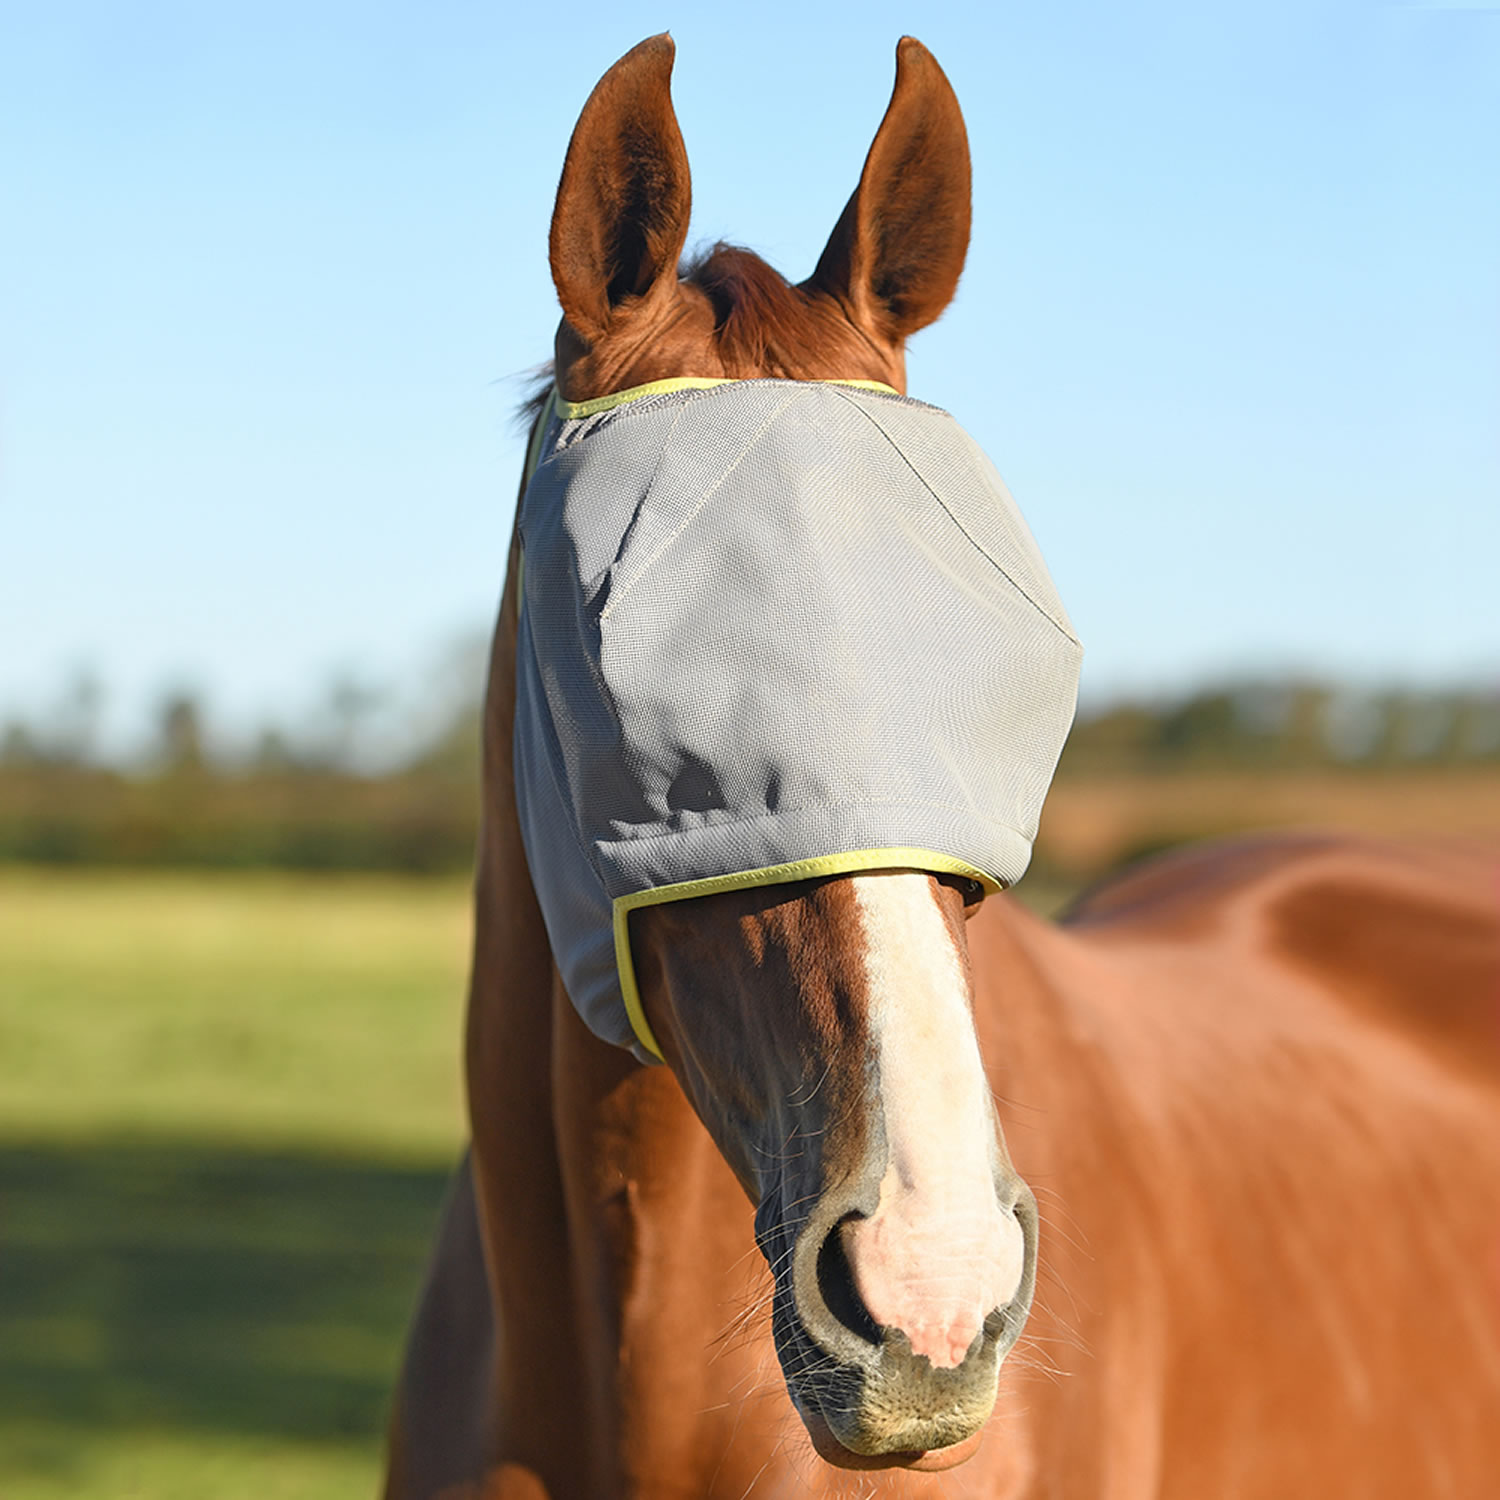 EQUILIBRIUM FIELD RELIEF MIDI FLY MASK NO EARS GREY/YELLOW XSMALL GREY/YELLOW XSMALL